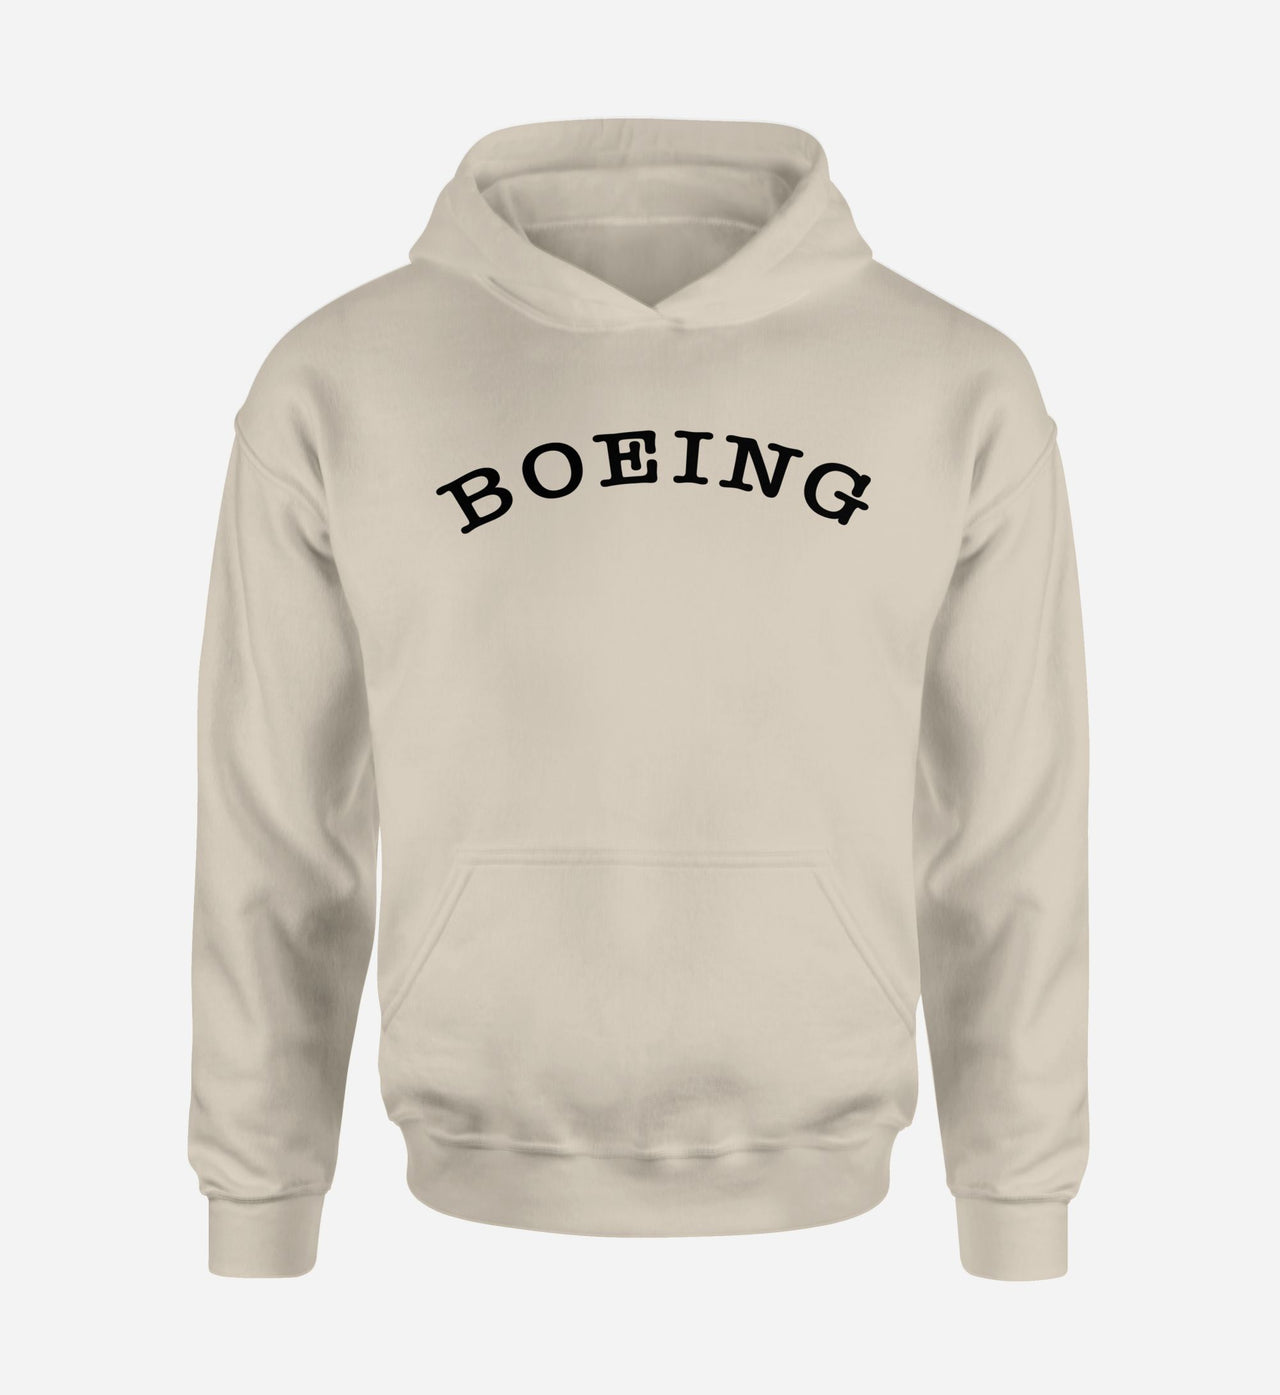 Special BOEING Text Designed Hoodies